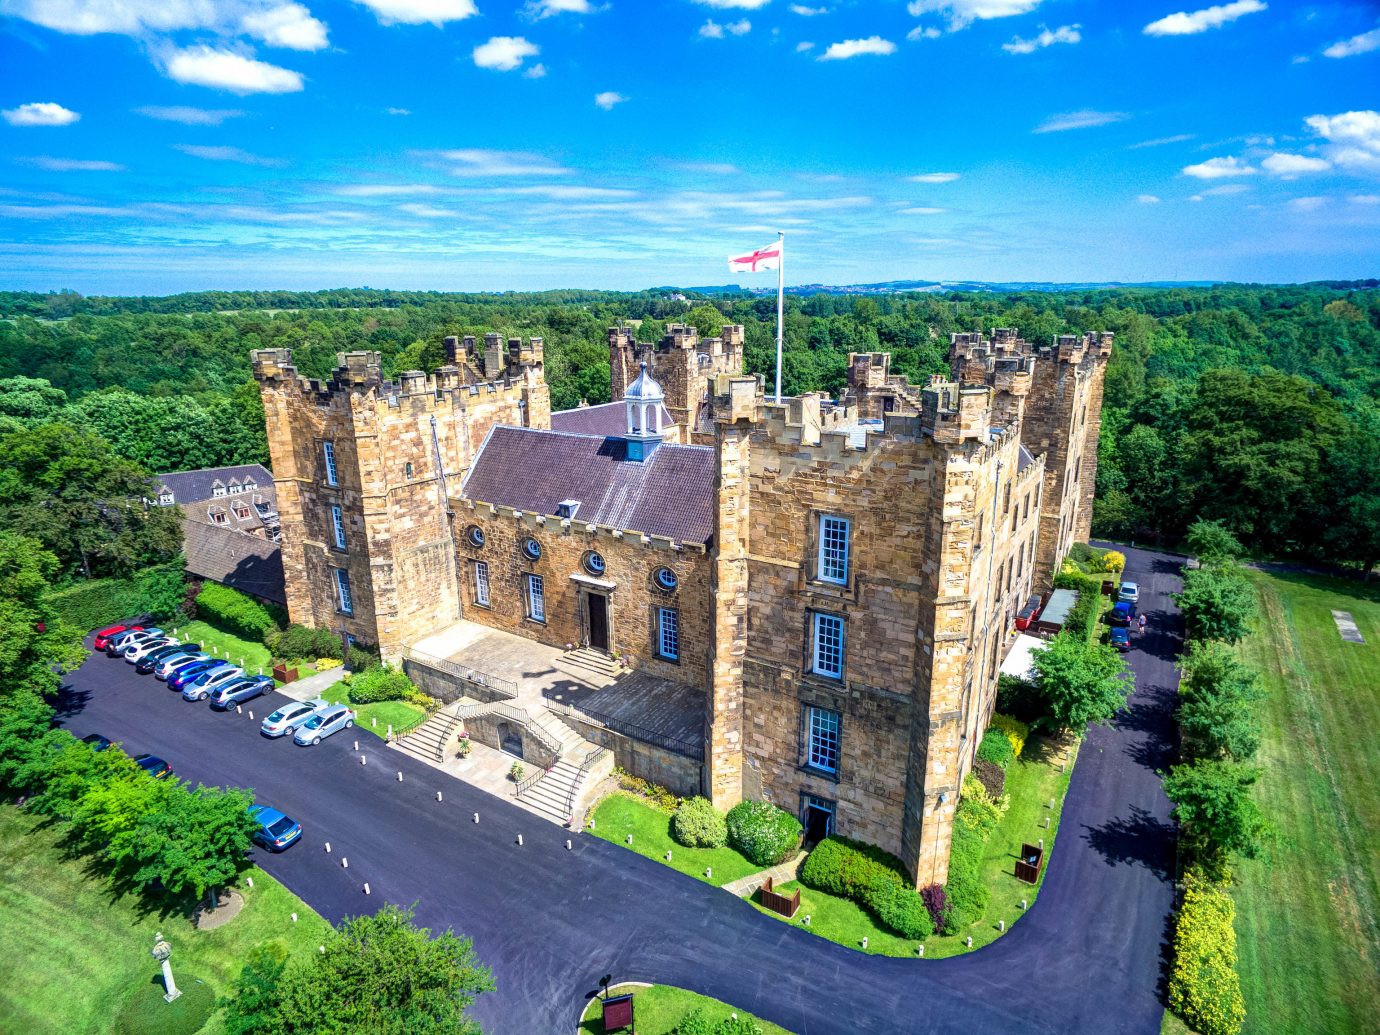 Hotels sky grass outdoor historic site landmark archaeological site castle building estate Ruins tourism fortification vacation château aerial photography canyon mansion terrain